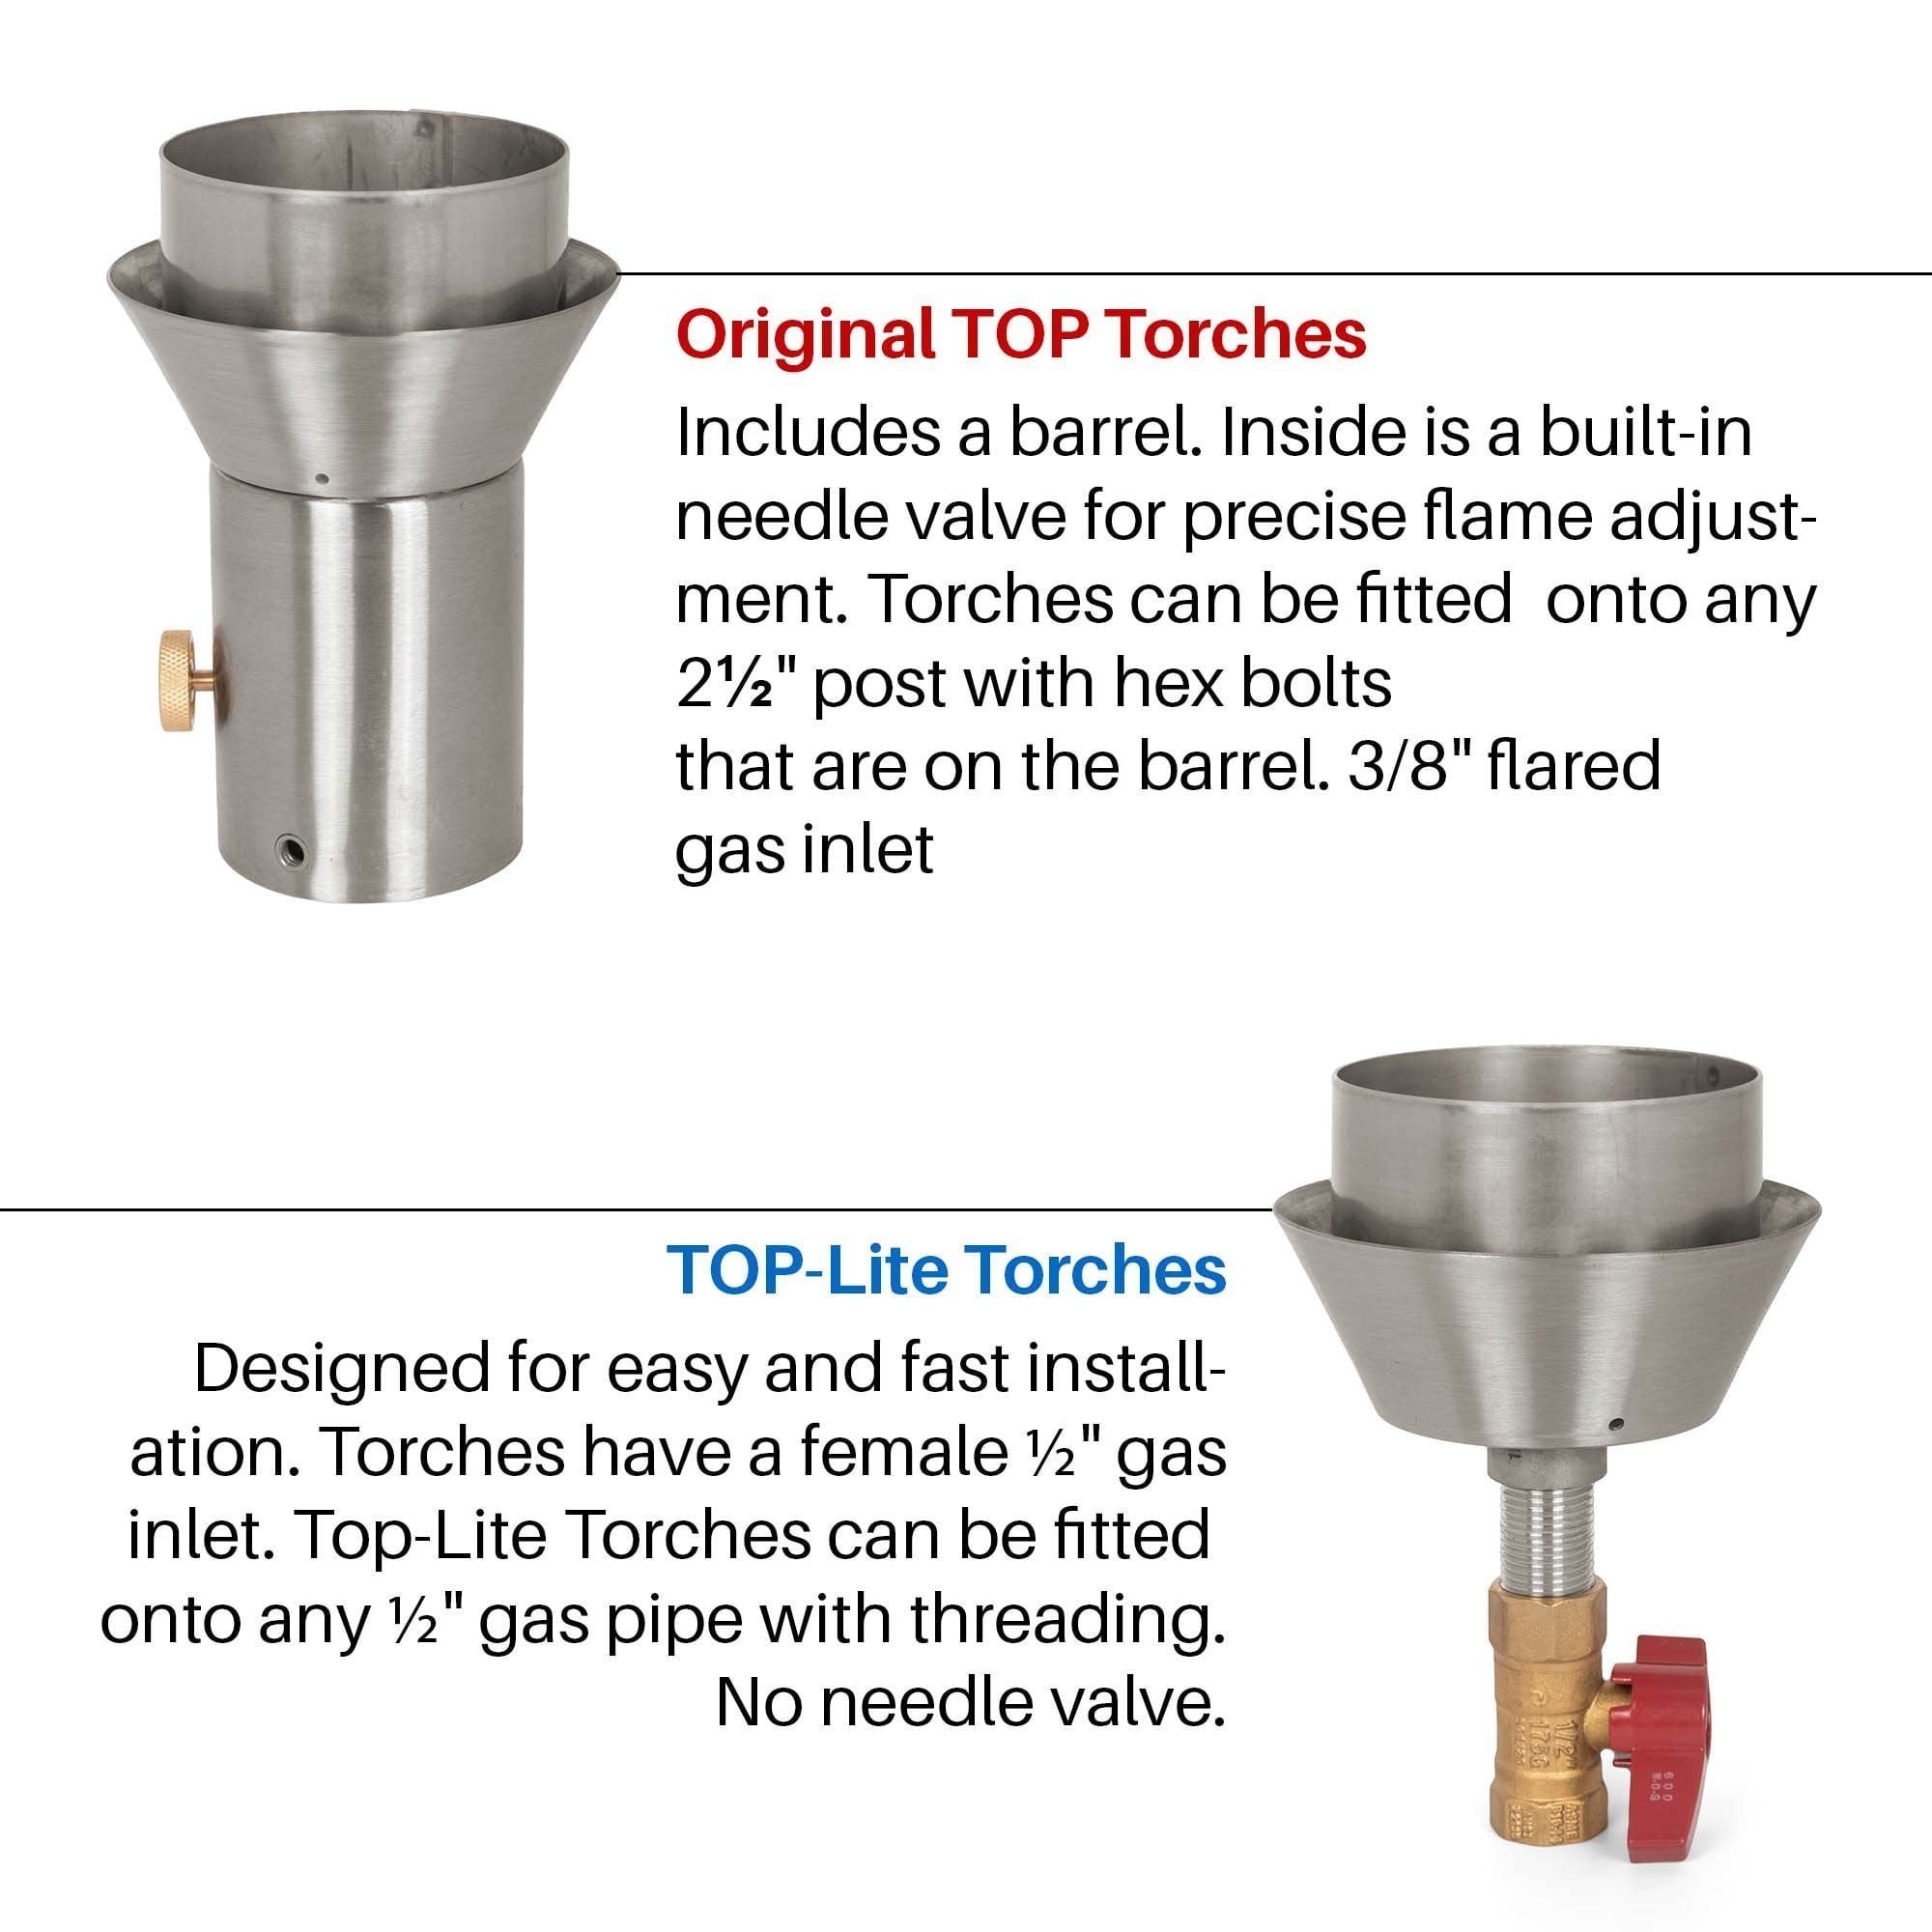 TOP FIRES ELLIPSE Fire Torch 14" in Stainless Steel - Majestic Fountains